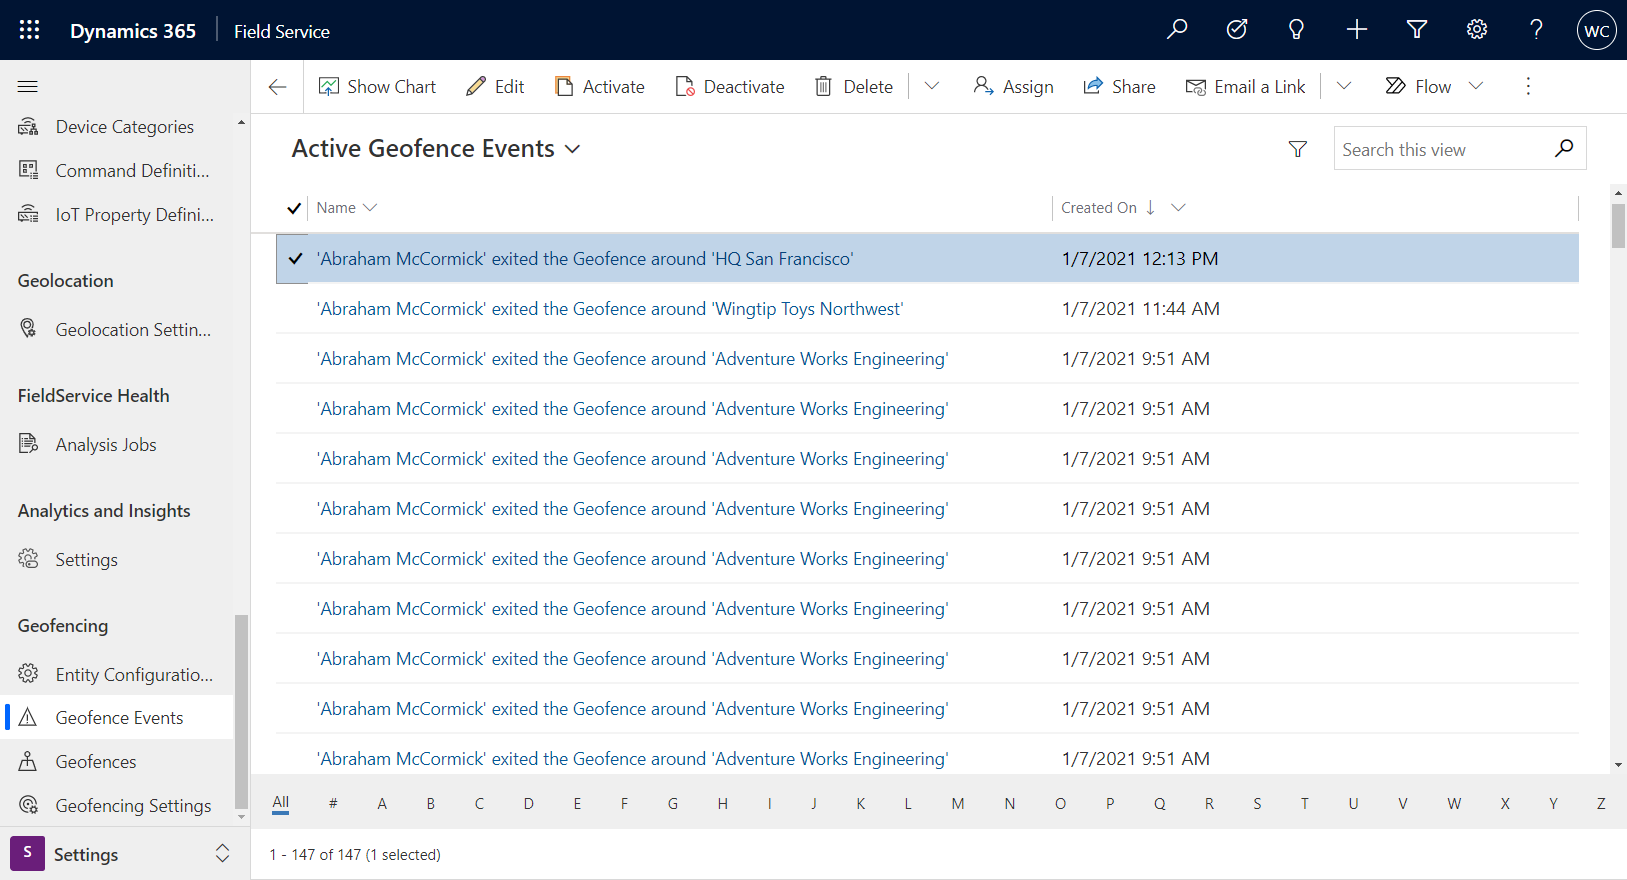 Screenshot of Field Service showing a list of active geofences events.